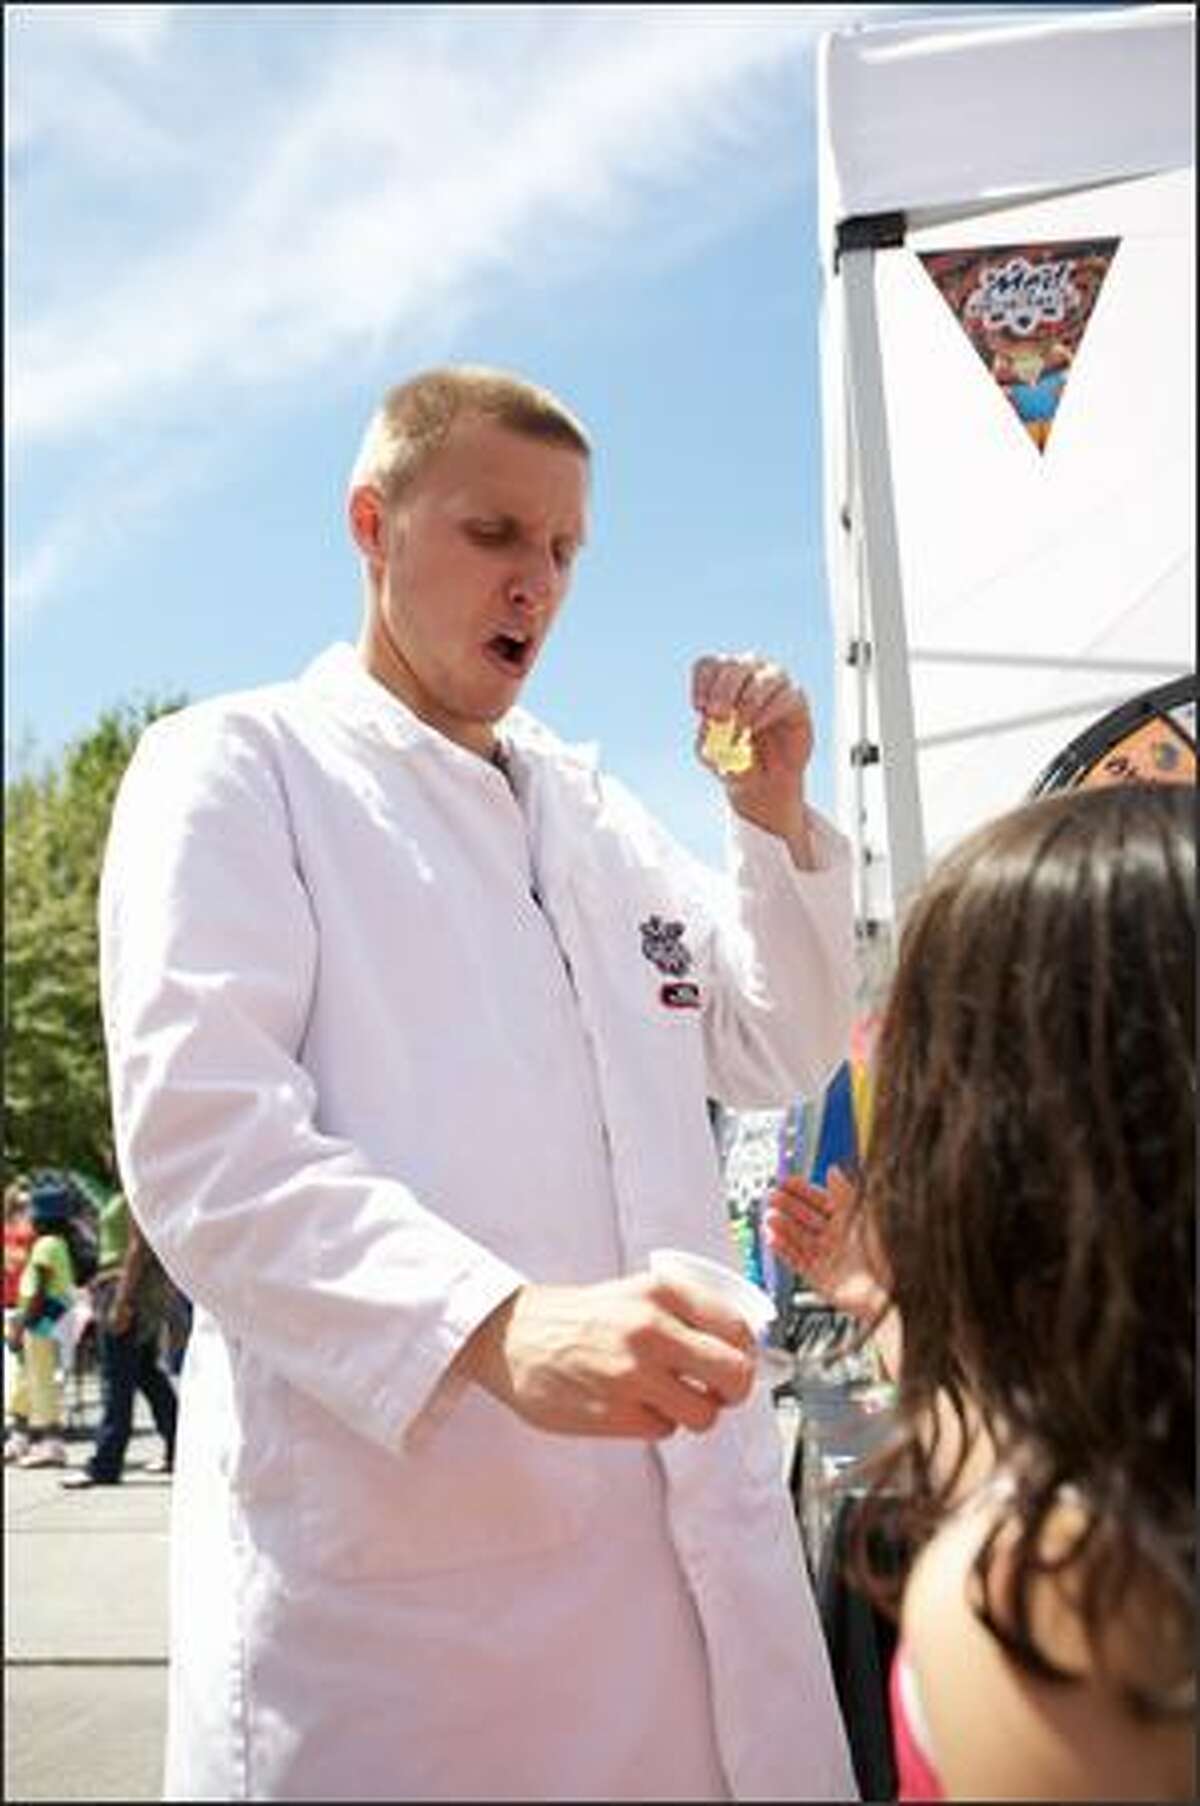 A Mad Science demonstrator.